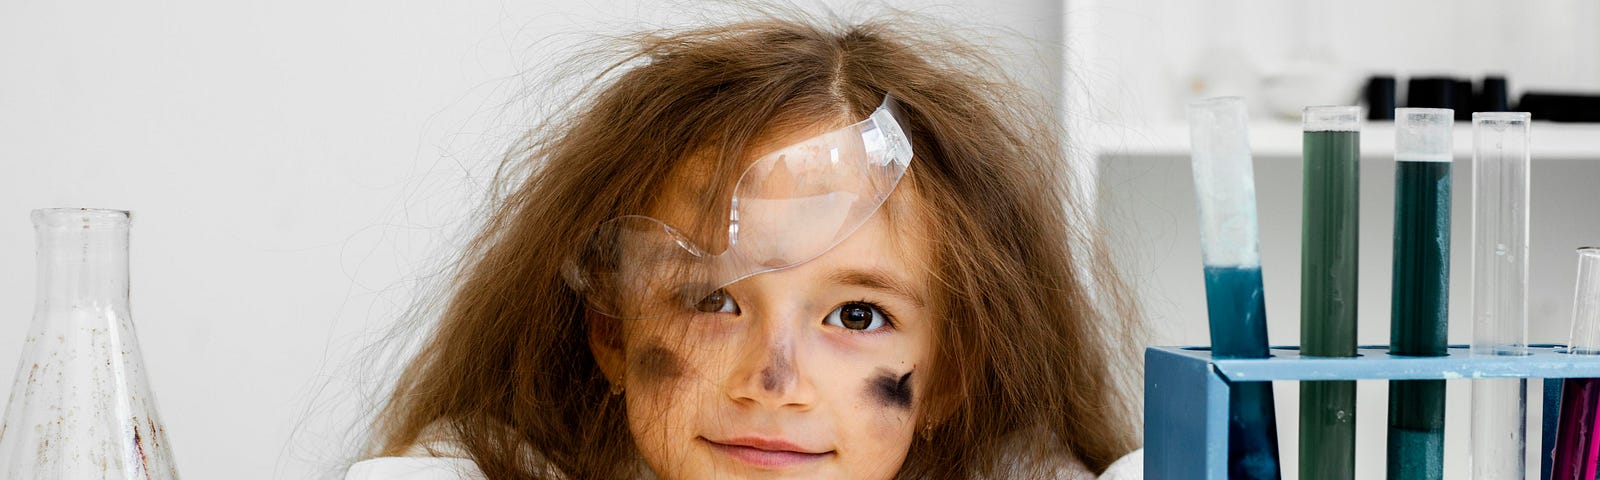 Little girl with smoke on her face, test tubes beside her and protective glasses halfway off her face